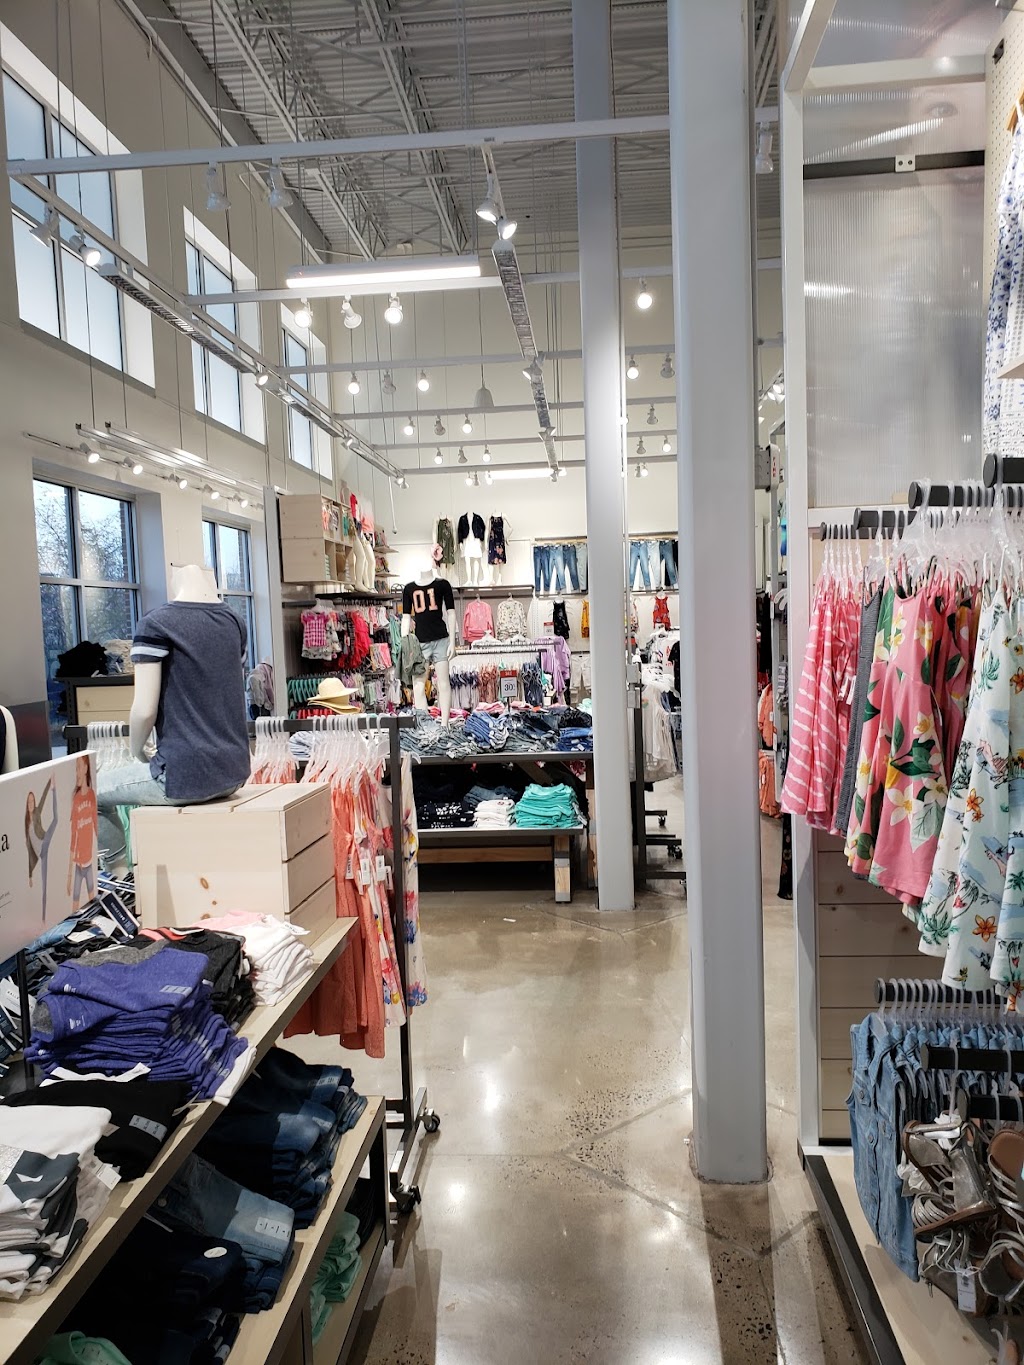 Old Navy | 220 Plaza Drive SUITE #2, Collegeville, PA 19426 | Phone: (610) 489-8013